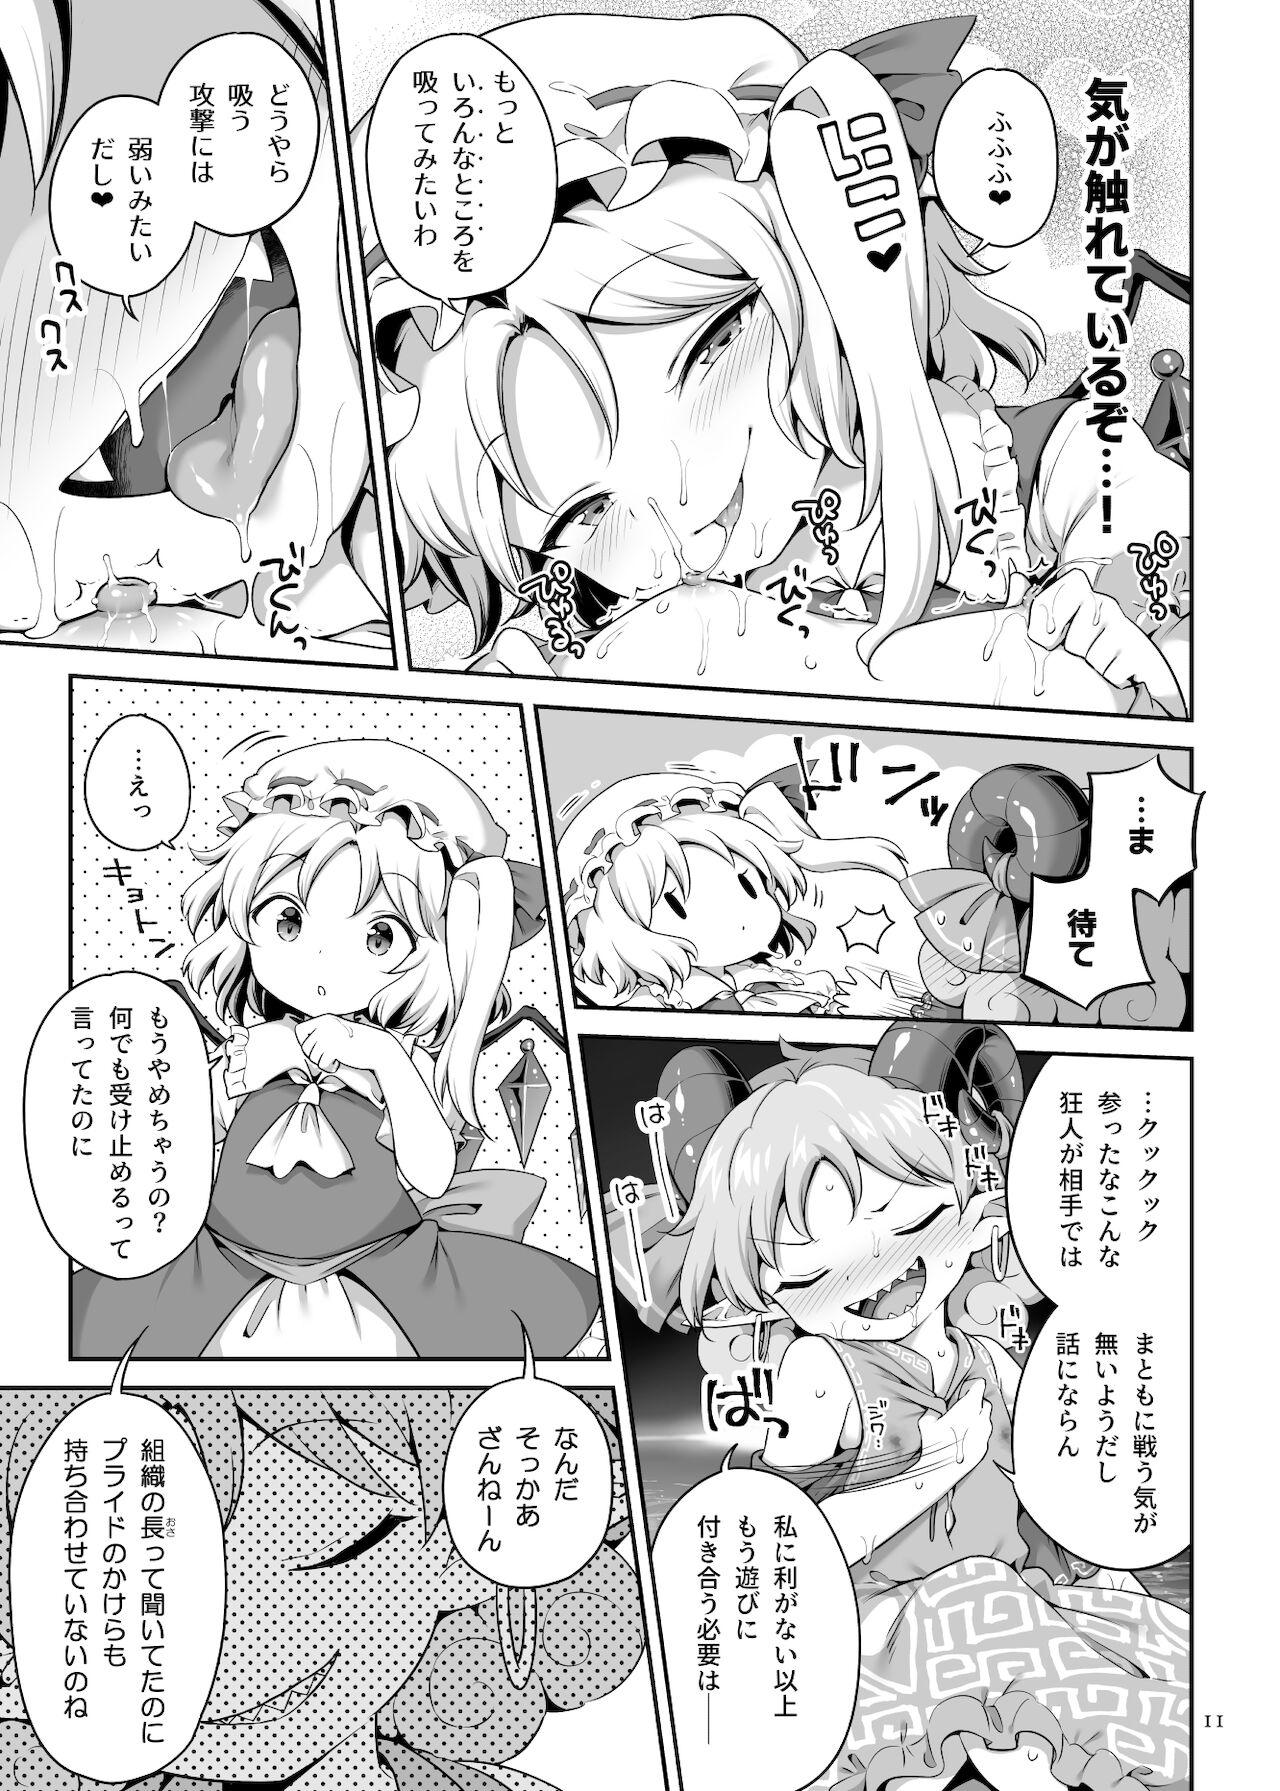 Softcore 吸われて駄目なら吸ってみろ! - Touhou project Virtual - Page 11